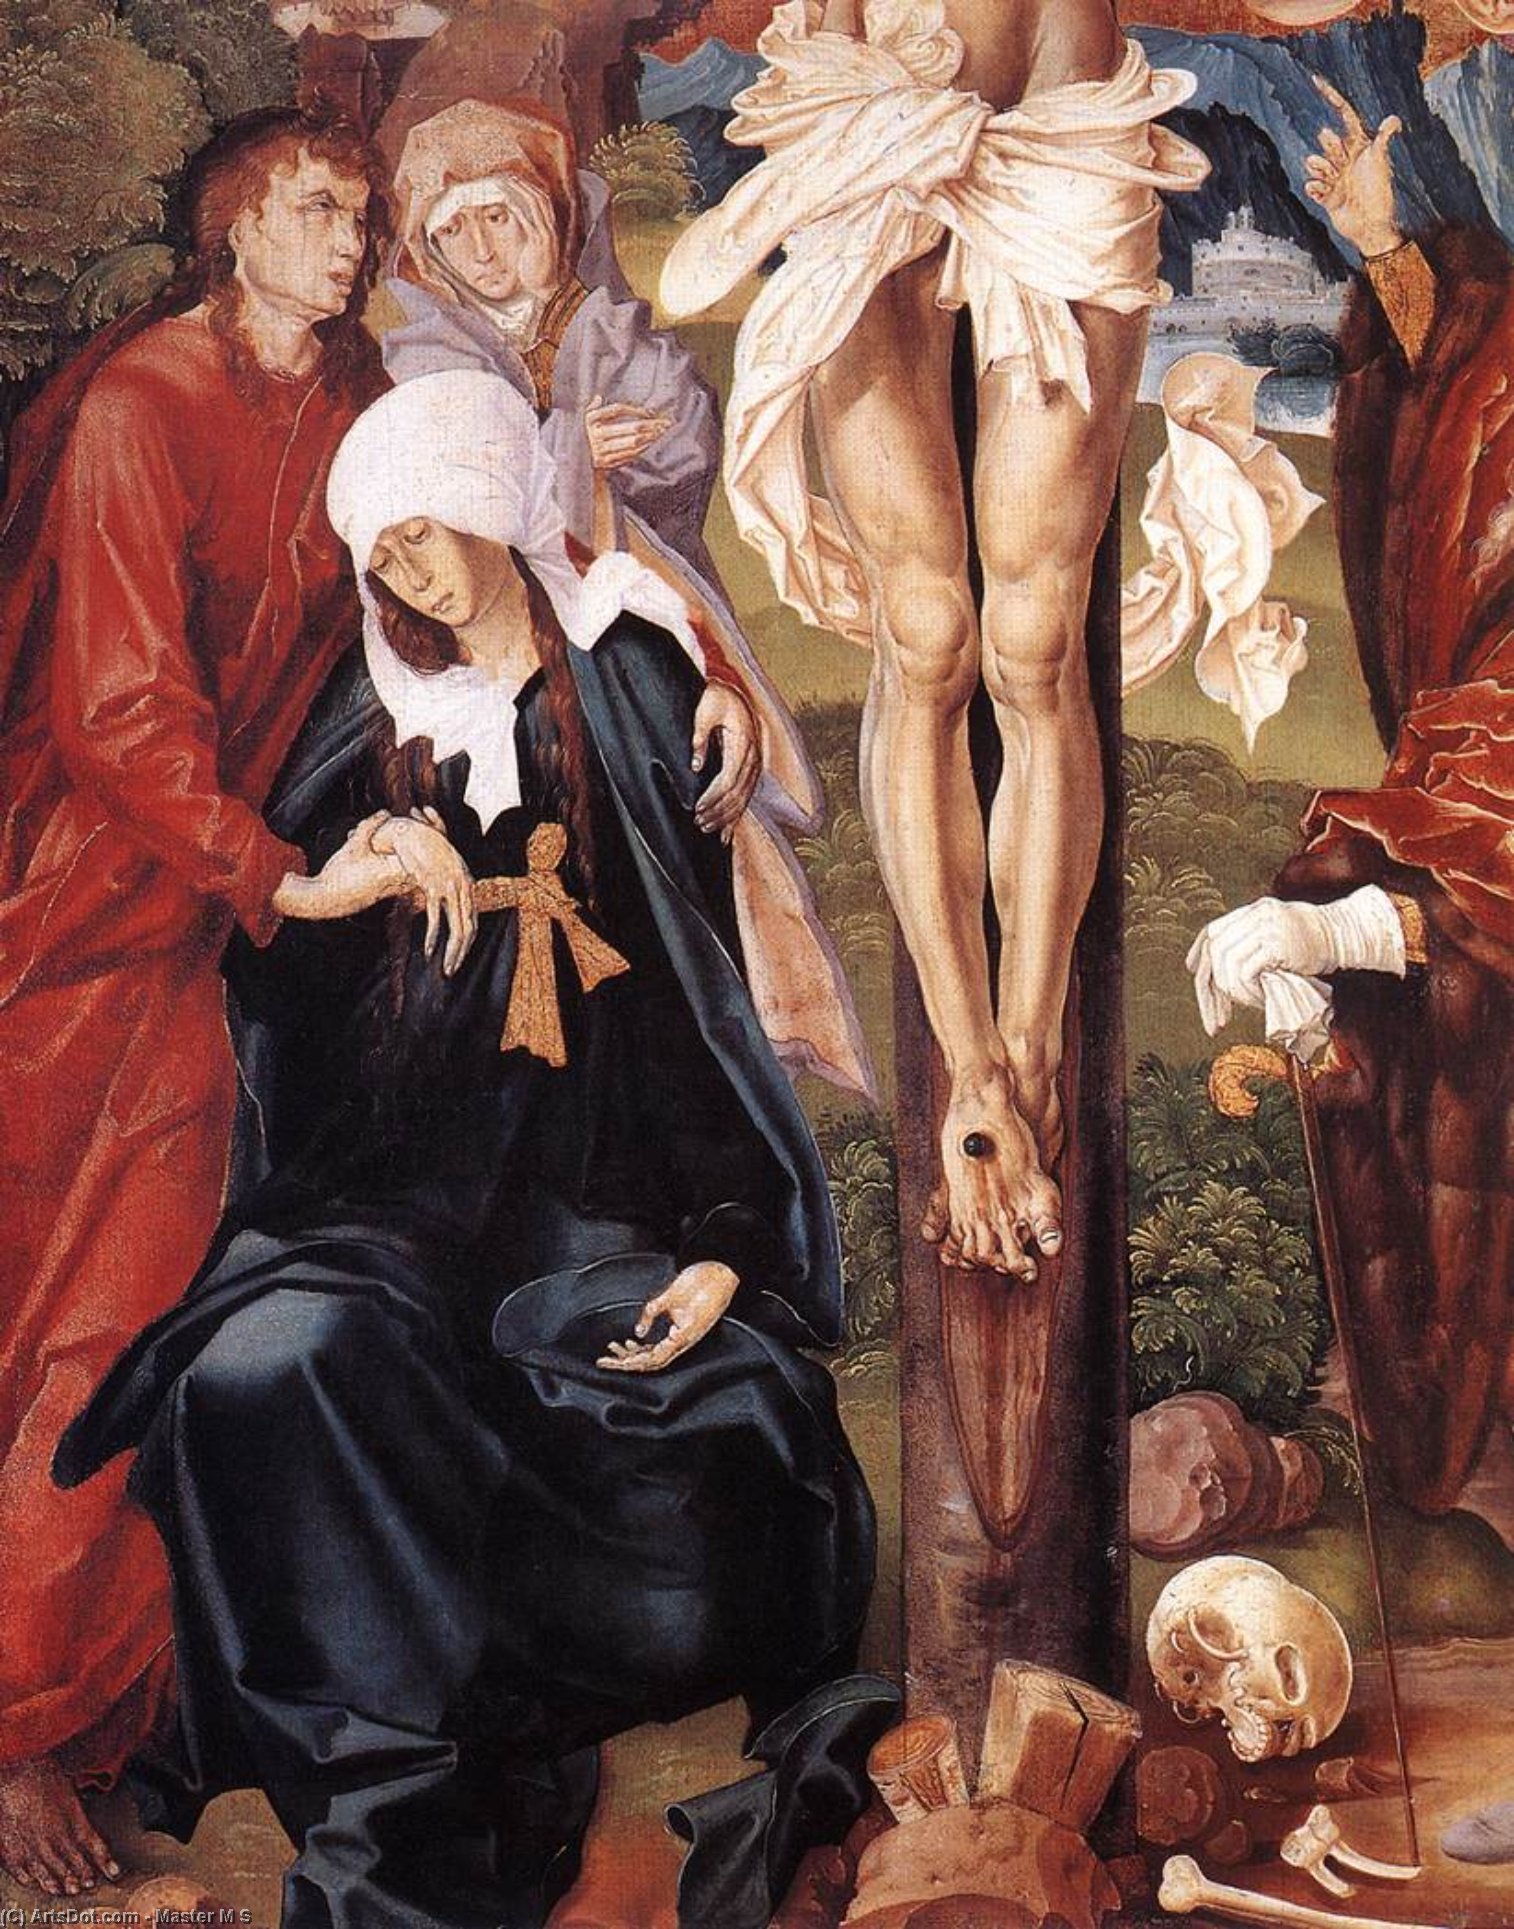 The Crucifixion (detail), 1506 by Master M S Master M S | ArtsDot.com